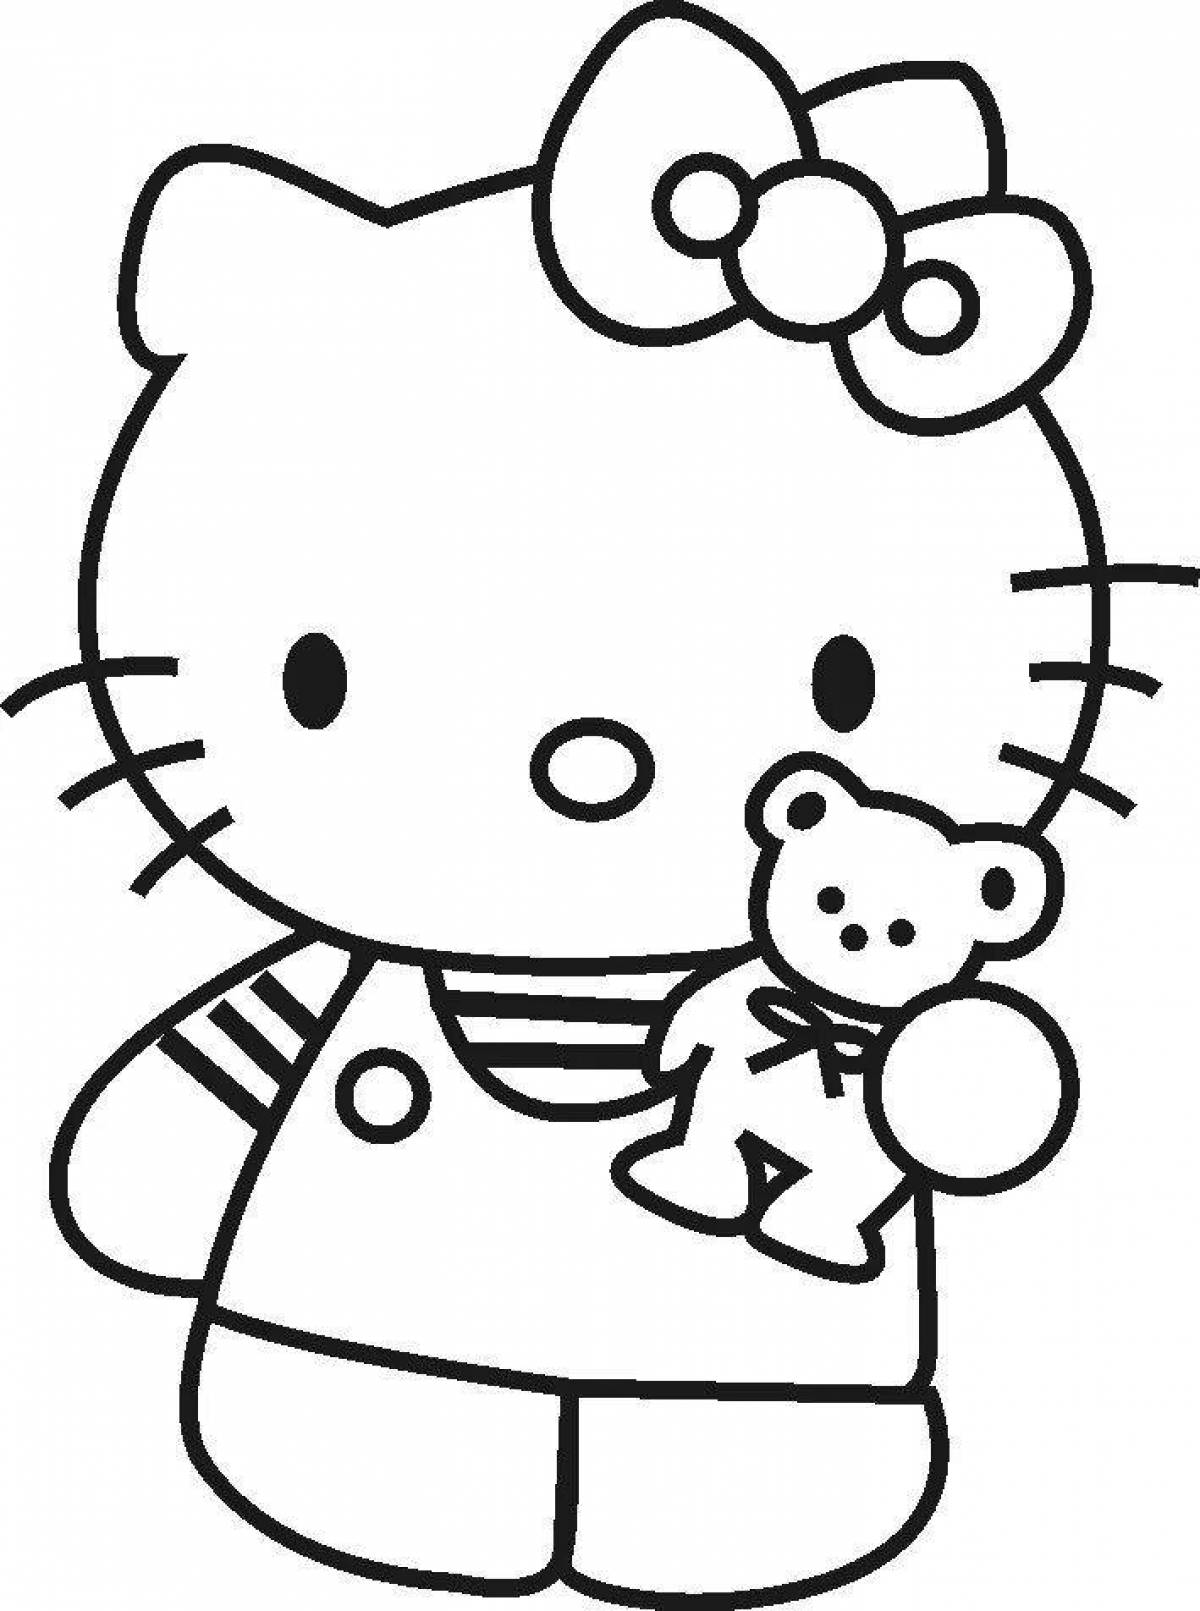 Playful hello kitty coloring page for kids